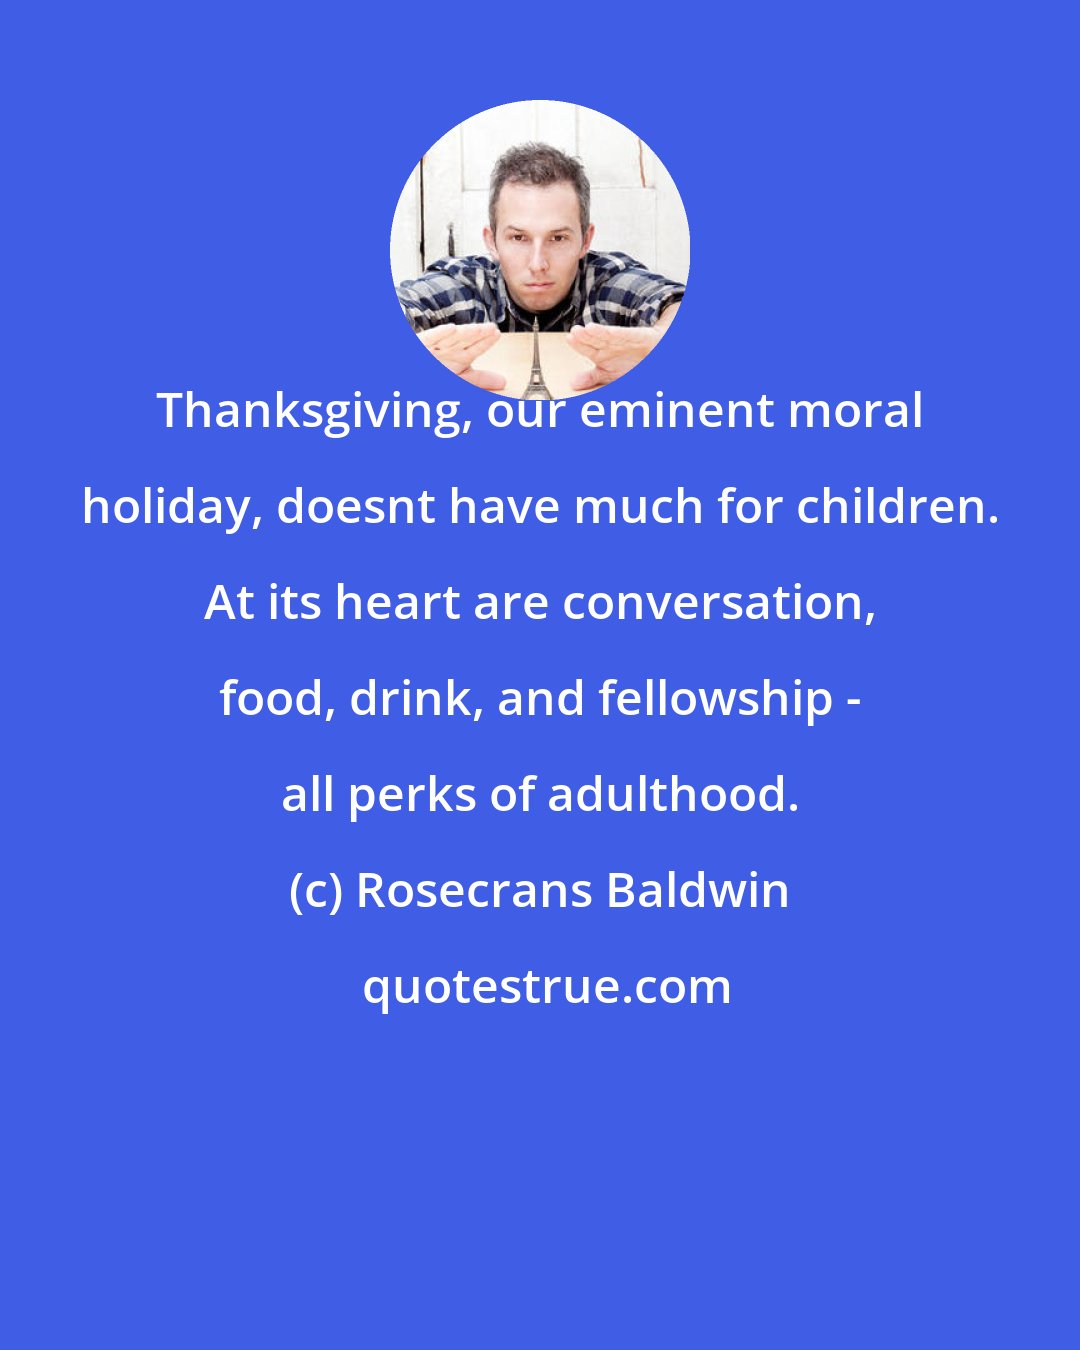 Rosecrans Baldwin: Thanksgiving, our eminent moral holiday, doesnt have much for children. At its heart are conversation, food, drink, and fellowship - all perks of adulthood.